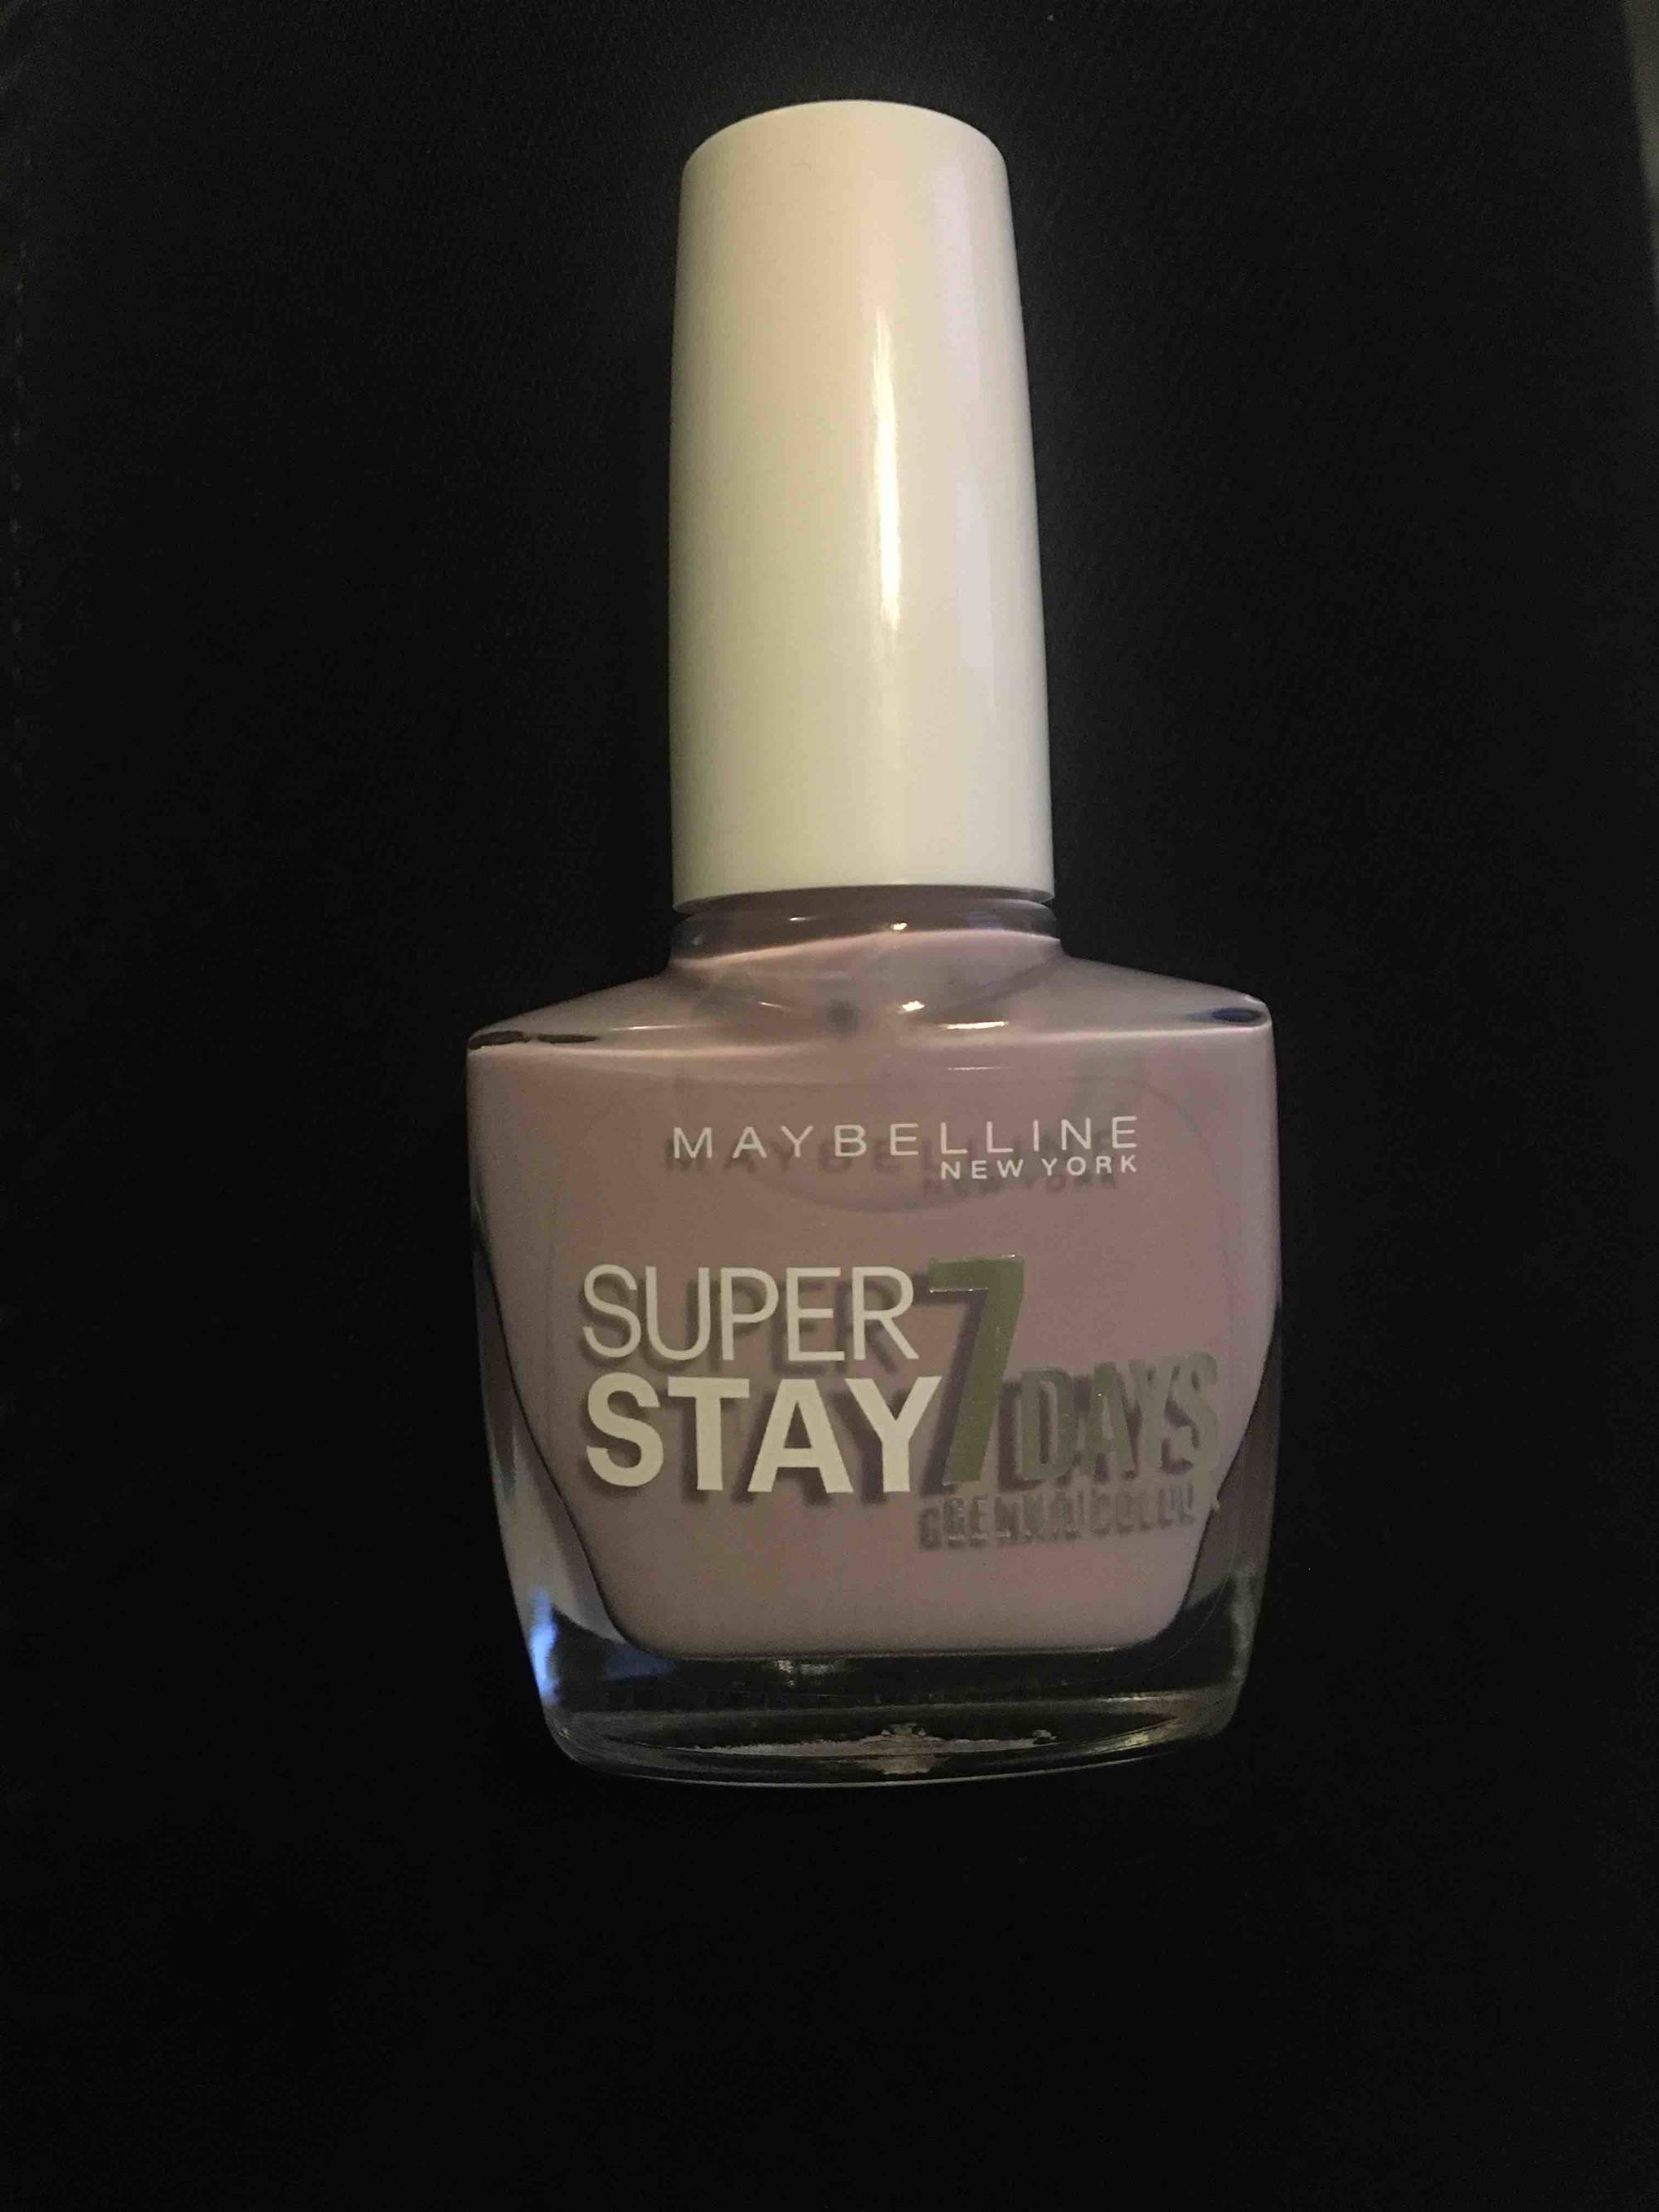 MAYBELLINE - Super stay 7 days - Vernis à ongles